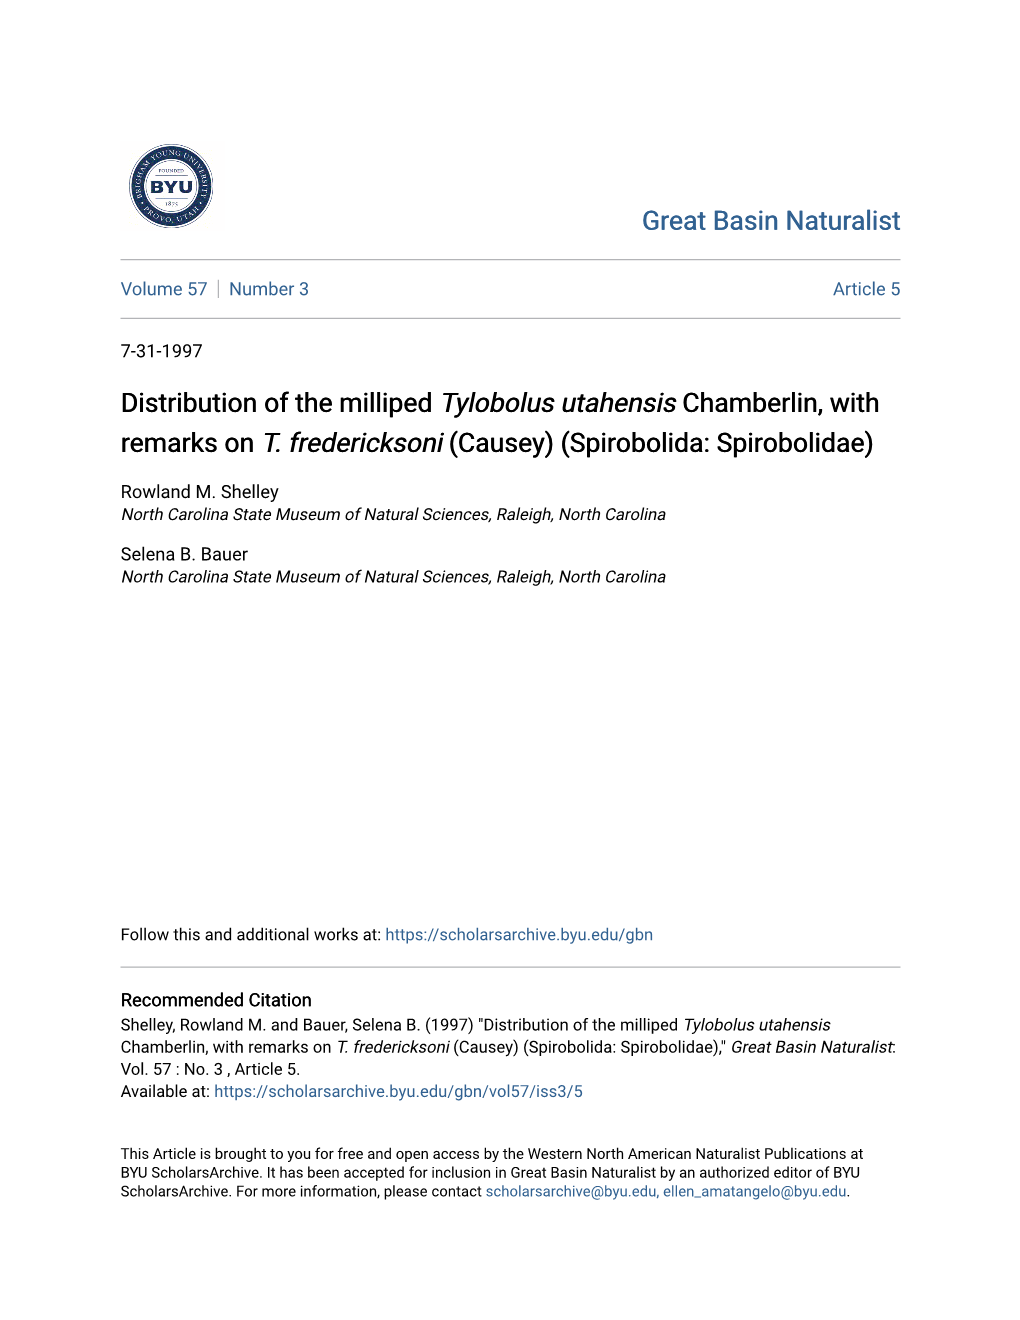 Distribution of the Milliped Tylobolus Utahensis Chamberlin, with Remarks on T